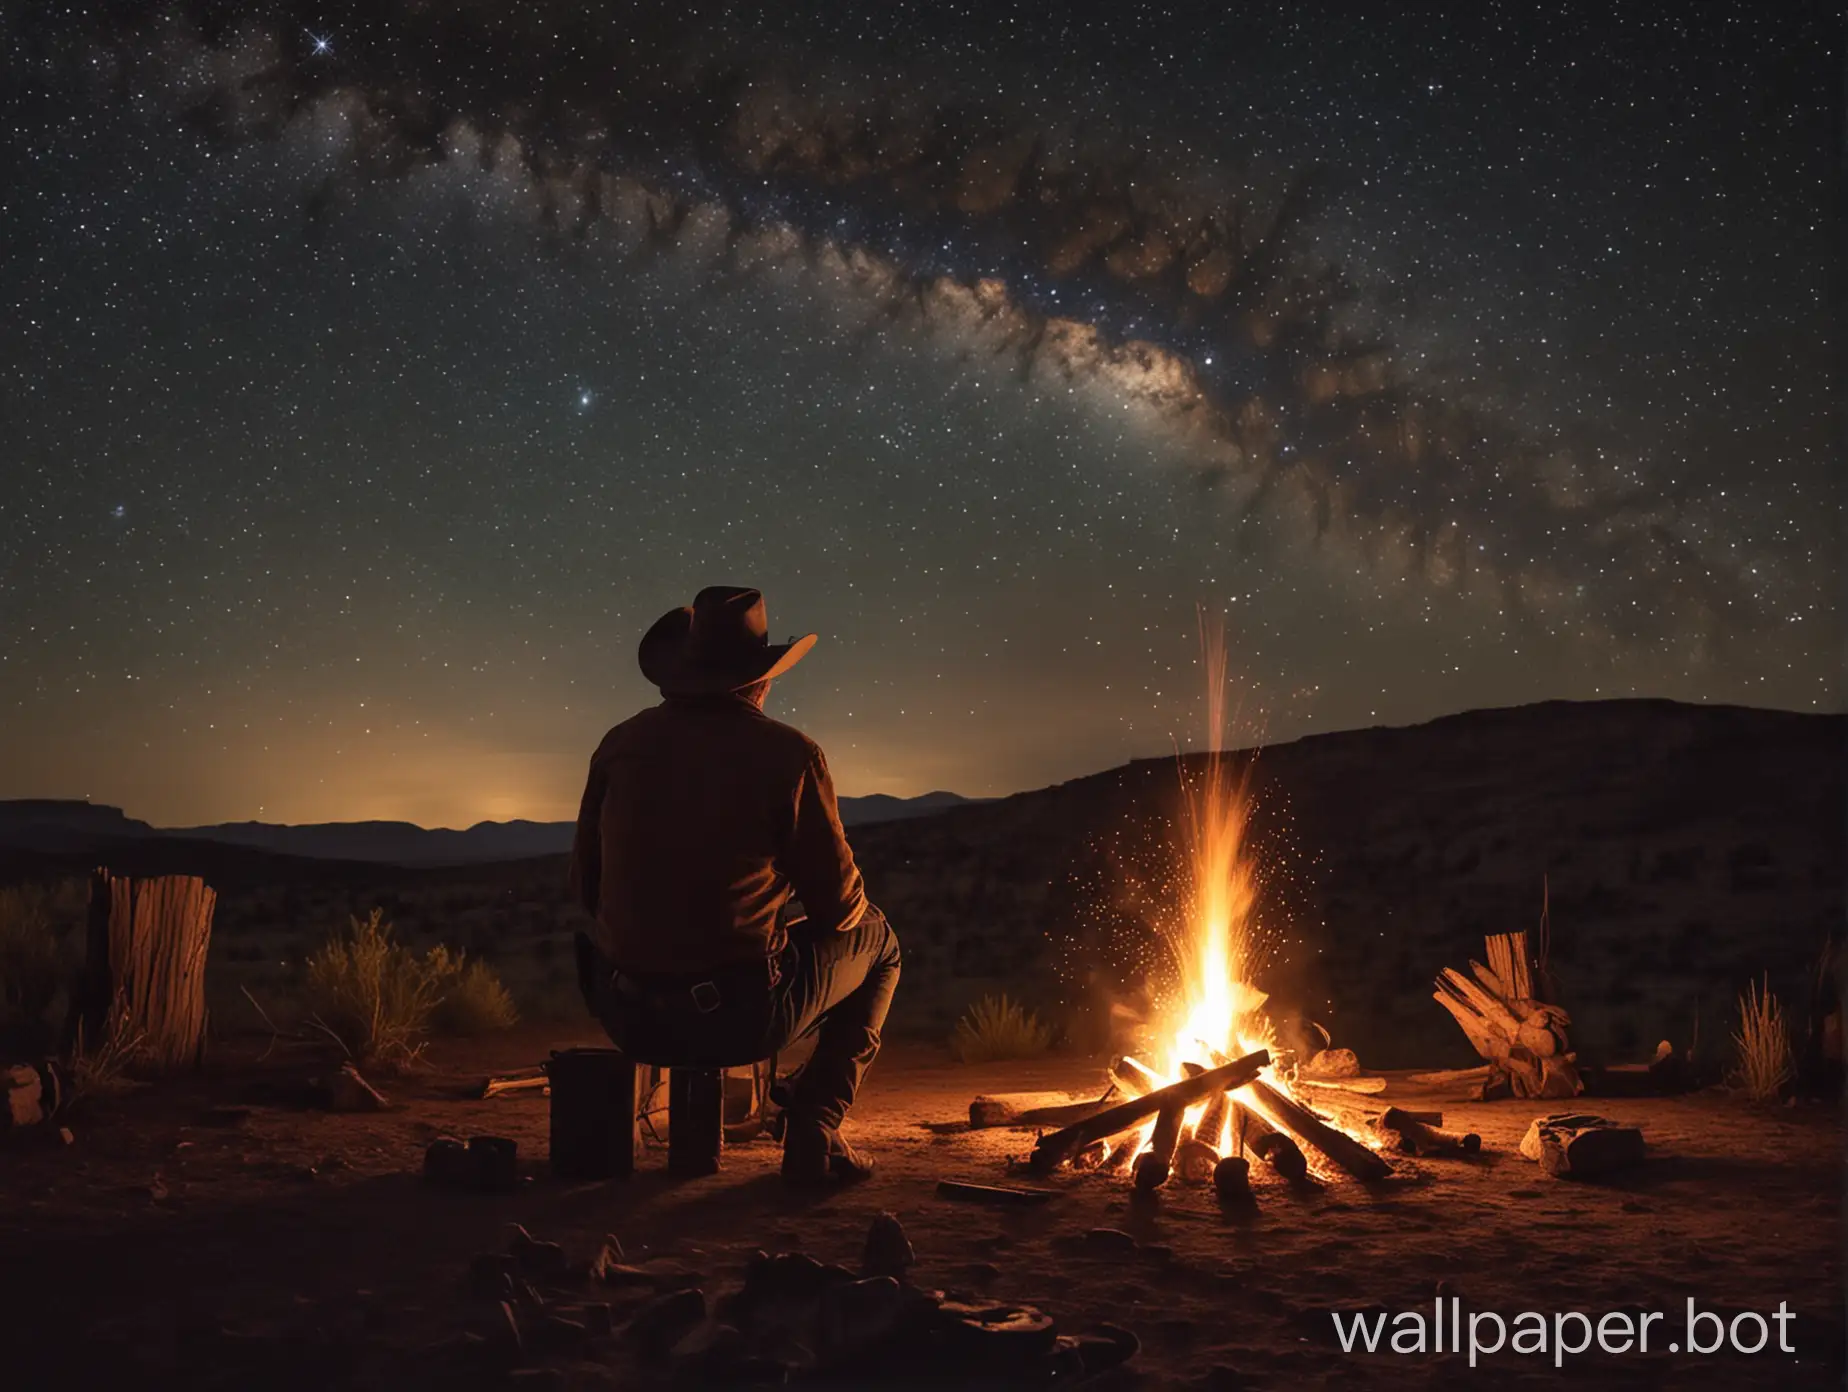 cowboy sitting next to fire, looks into the vast stars